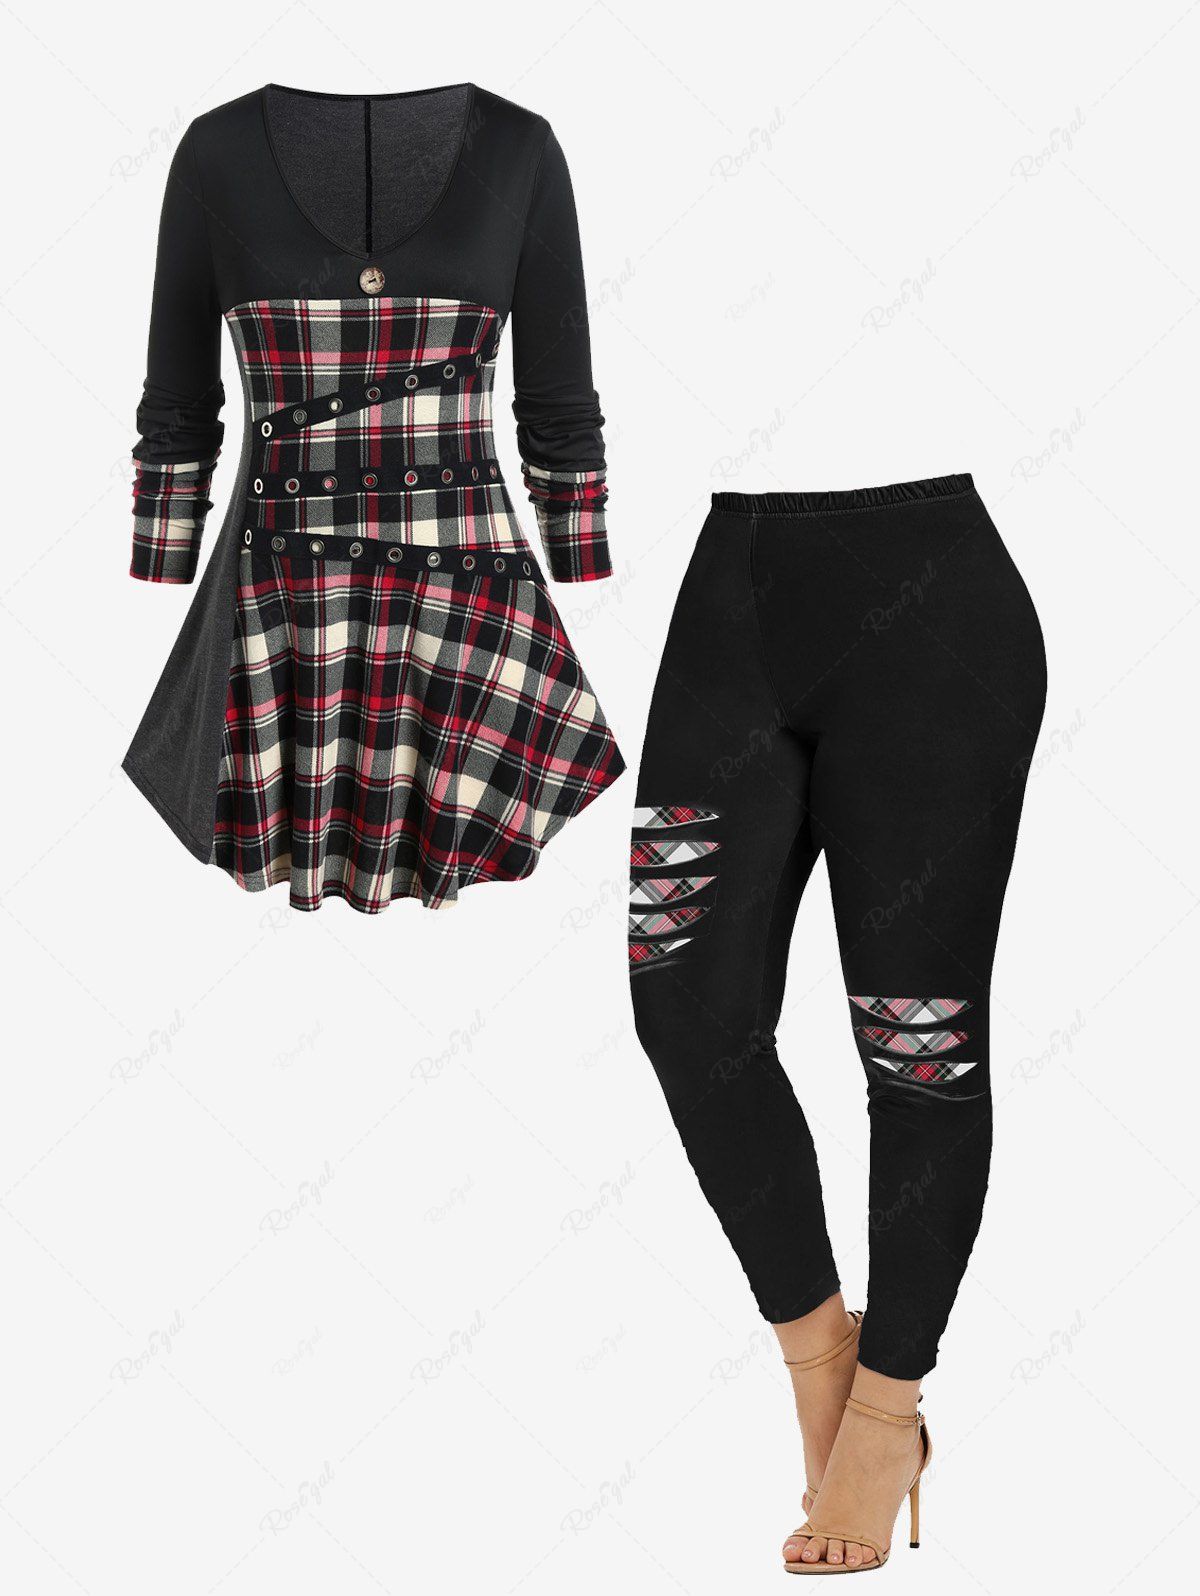 Fashion Plaid Grommets T-shirt and 3D Ripped Plaid Printed Leggings Plus Size Outfit  